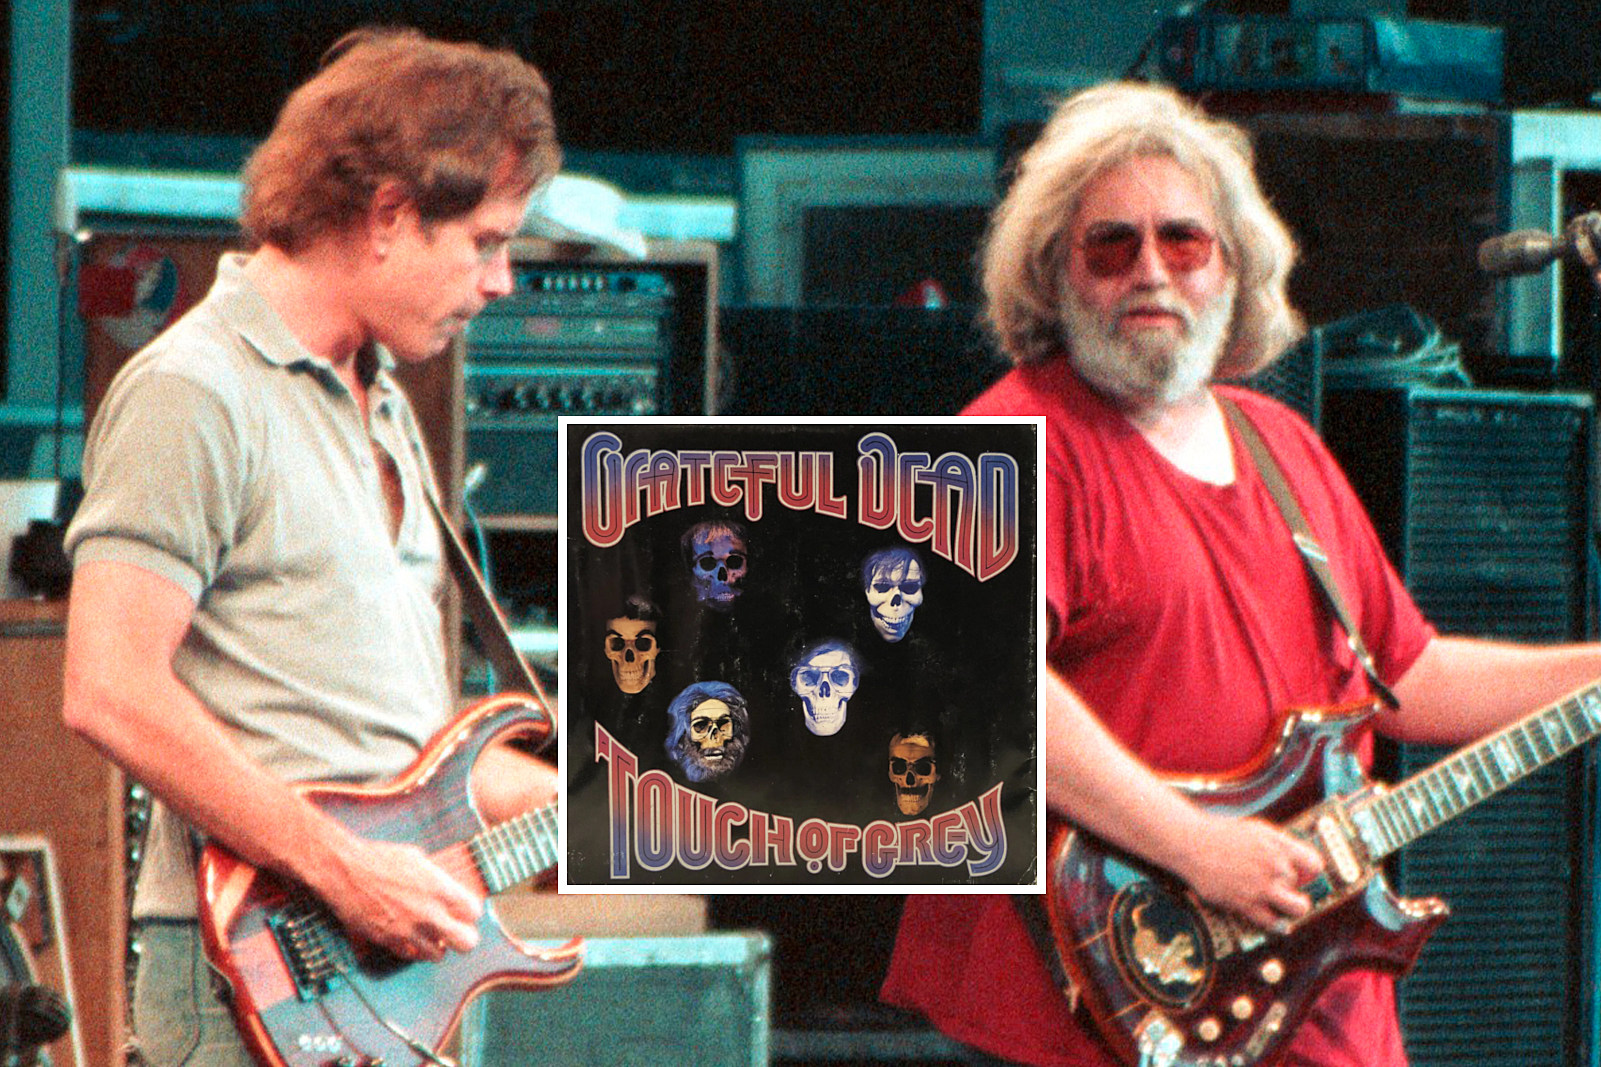 How 'Touch of Grey' 'Almost Killed' the Grateful Dead